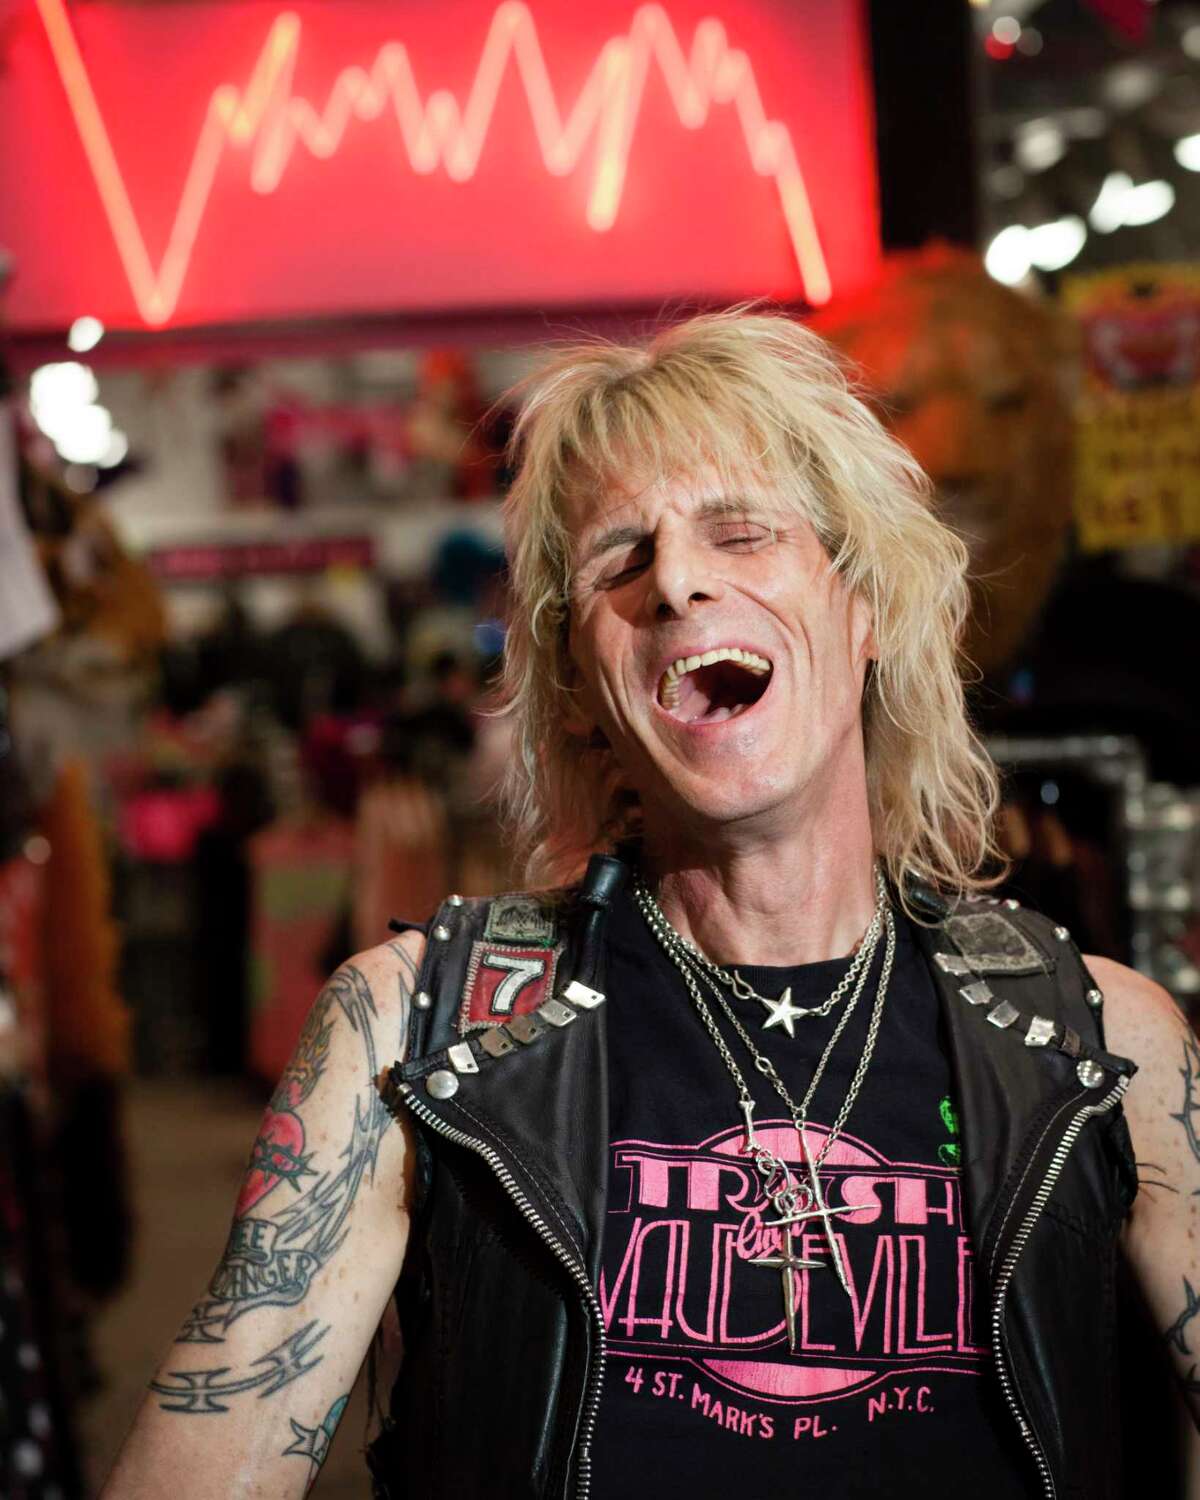 Jimmy Webb, the manager and buyer at Trash and Vaudeville, in New York, April 30, 2013. Trash and Vaudeville, around since 1975, remains a fixture in a very different East Village. (Deidre Schoo/The New York Times)